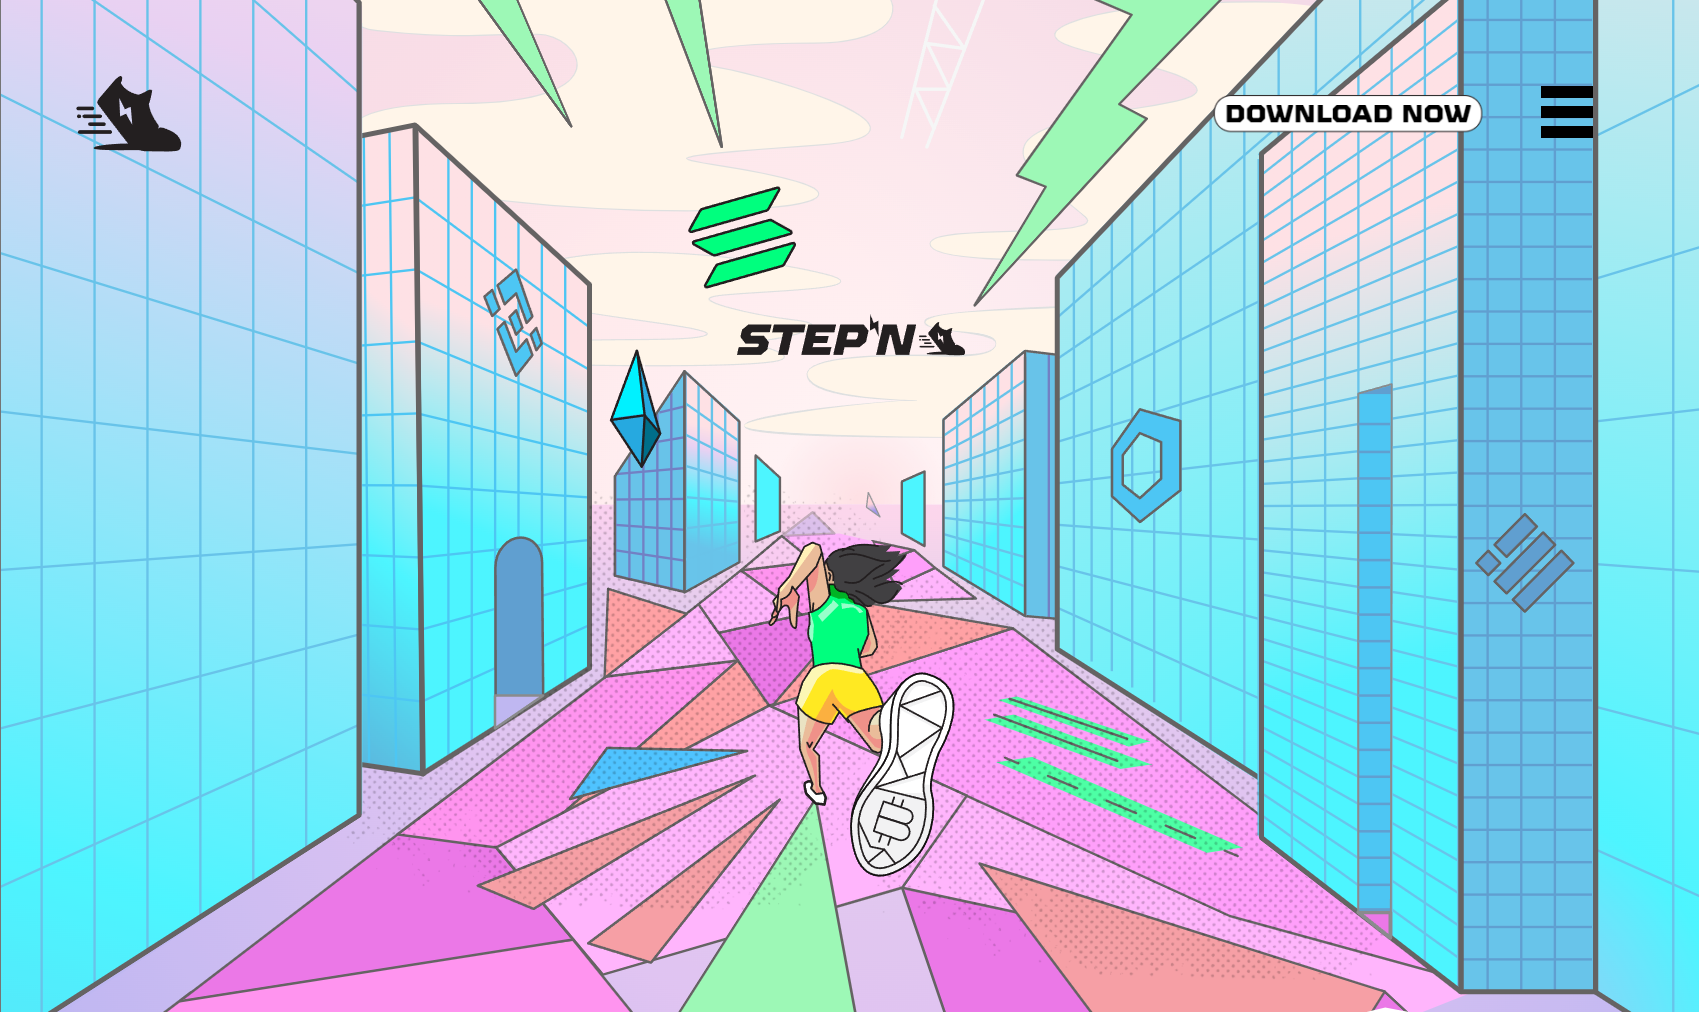 STEPN, the App that makes you earn cryptos while walking - Token Party